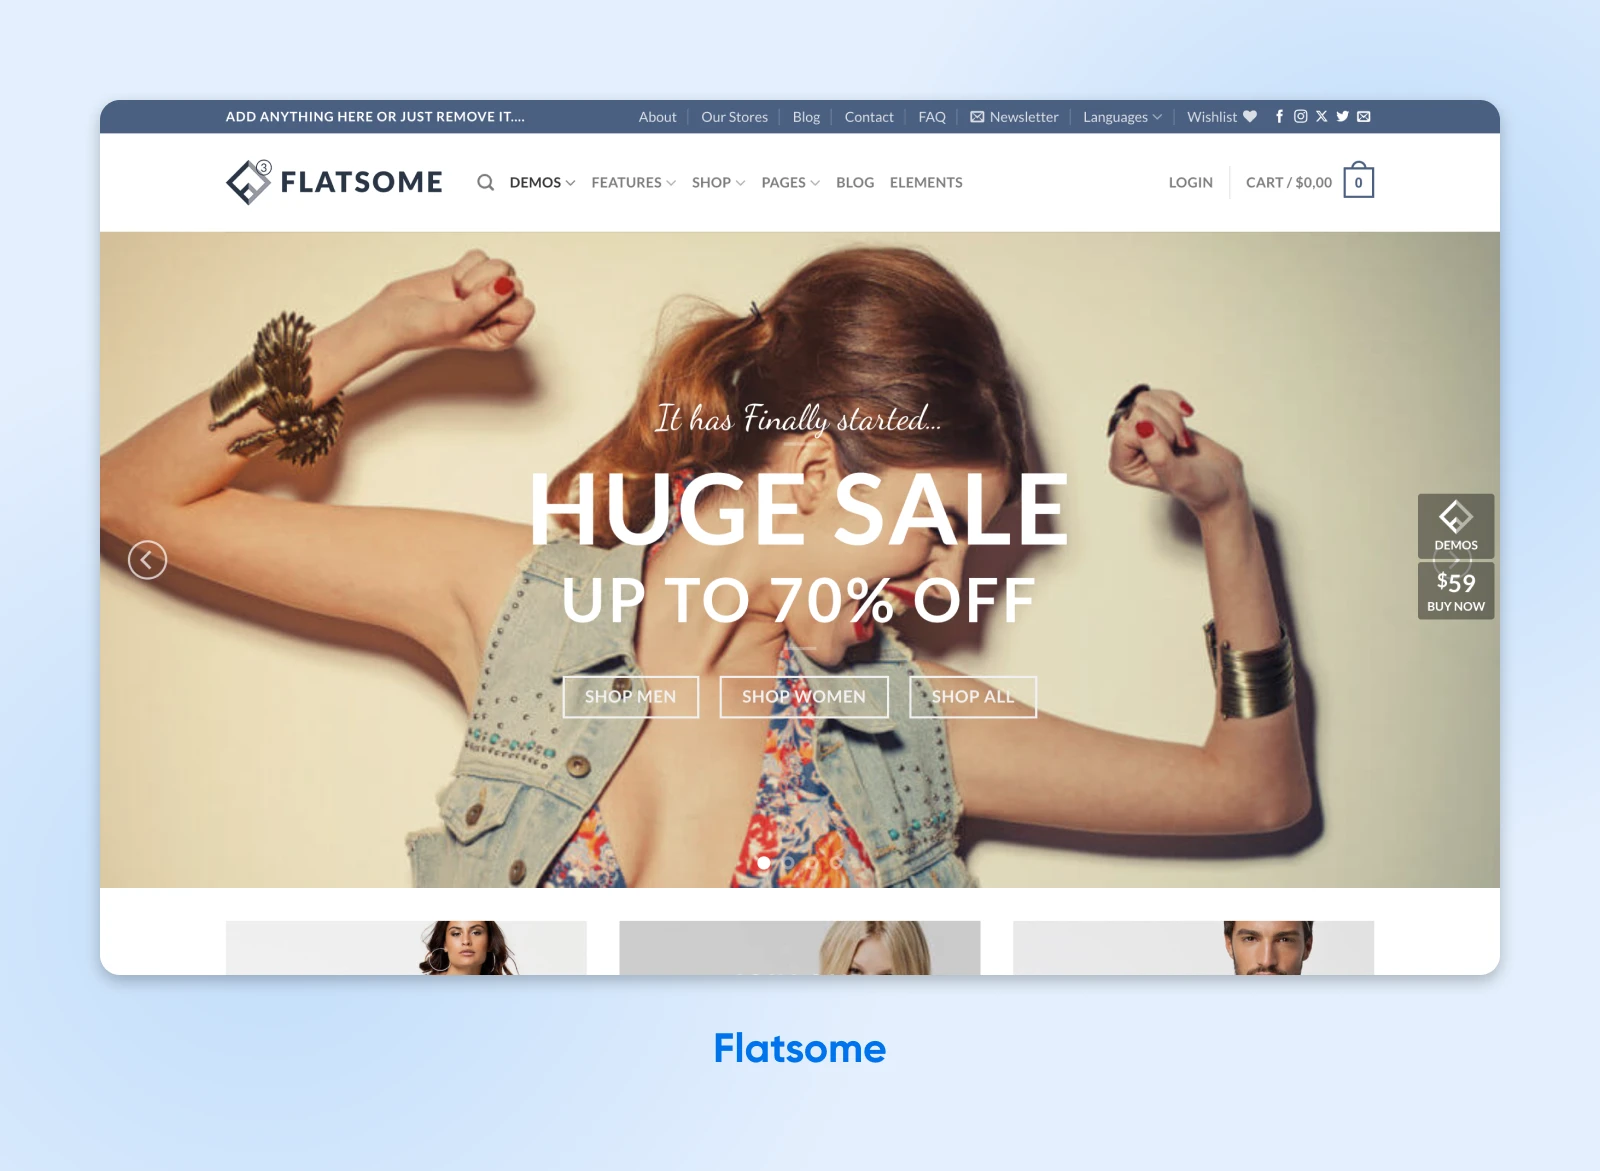 Flatsome WooCommerce theme with a sample page of an apparel e-commerce store advertising a 70% off sale.